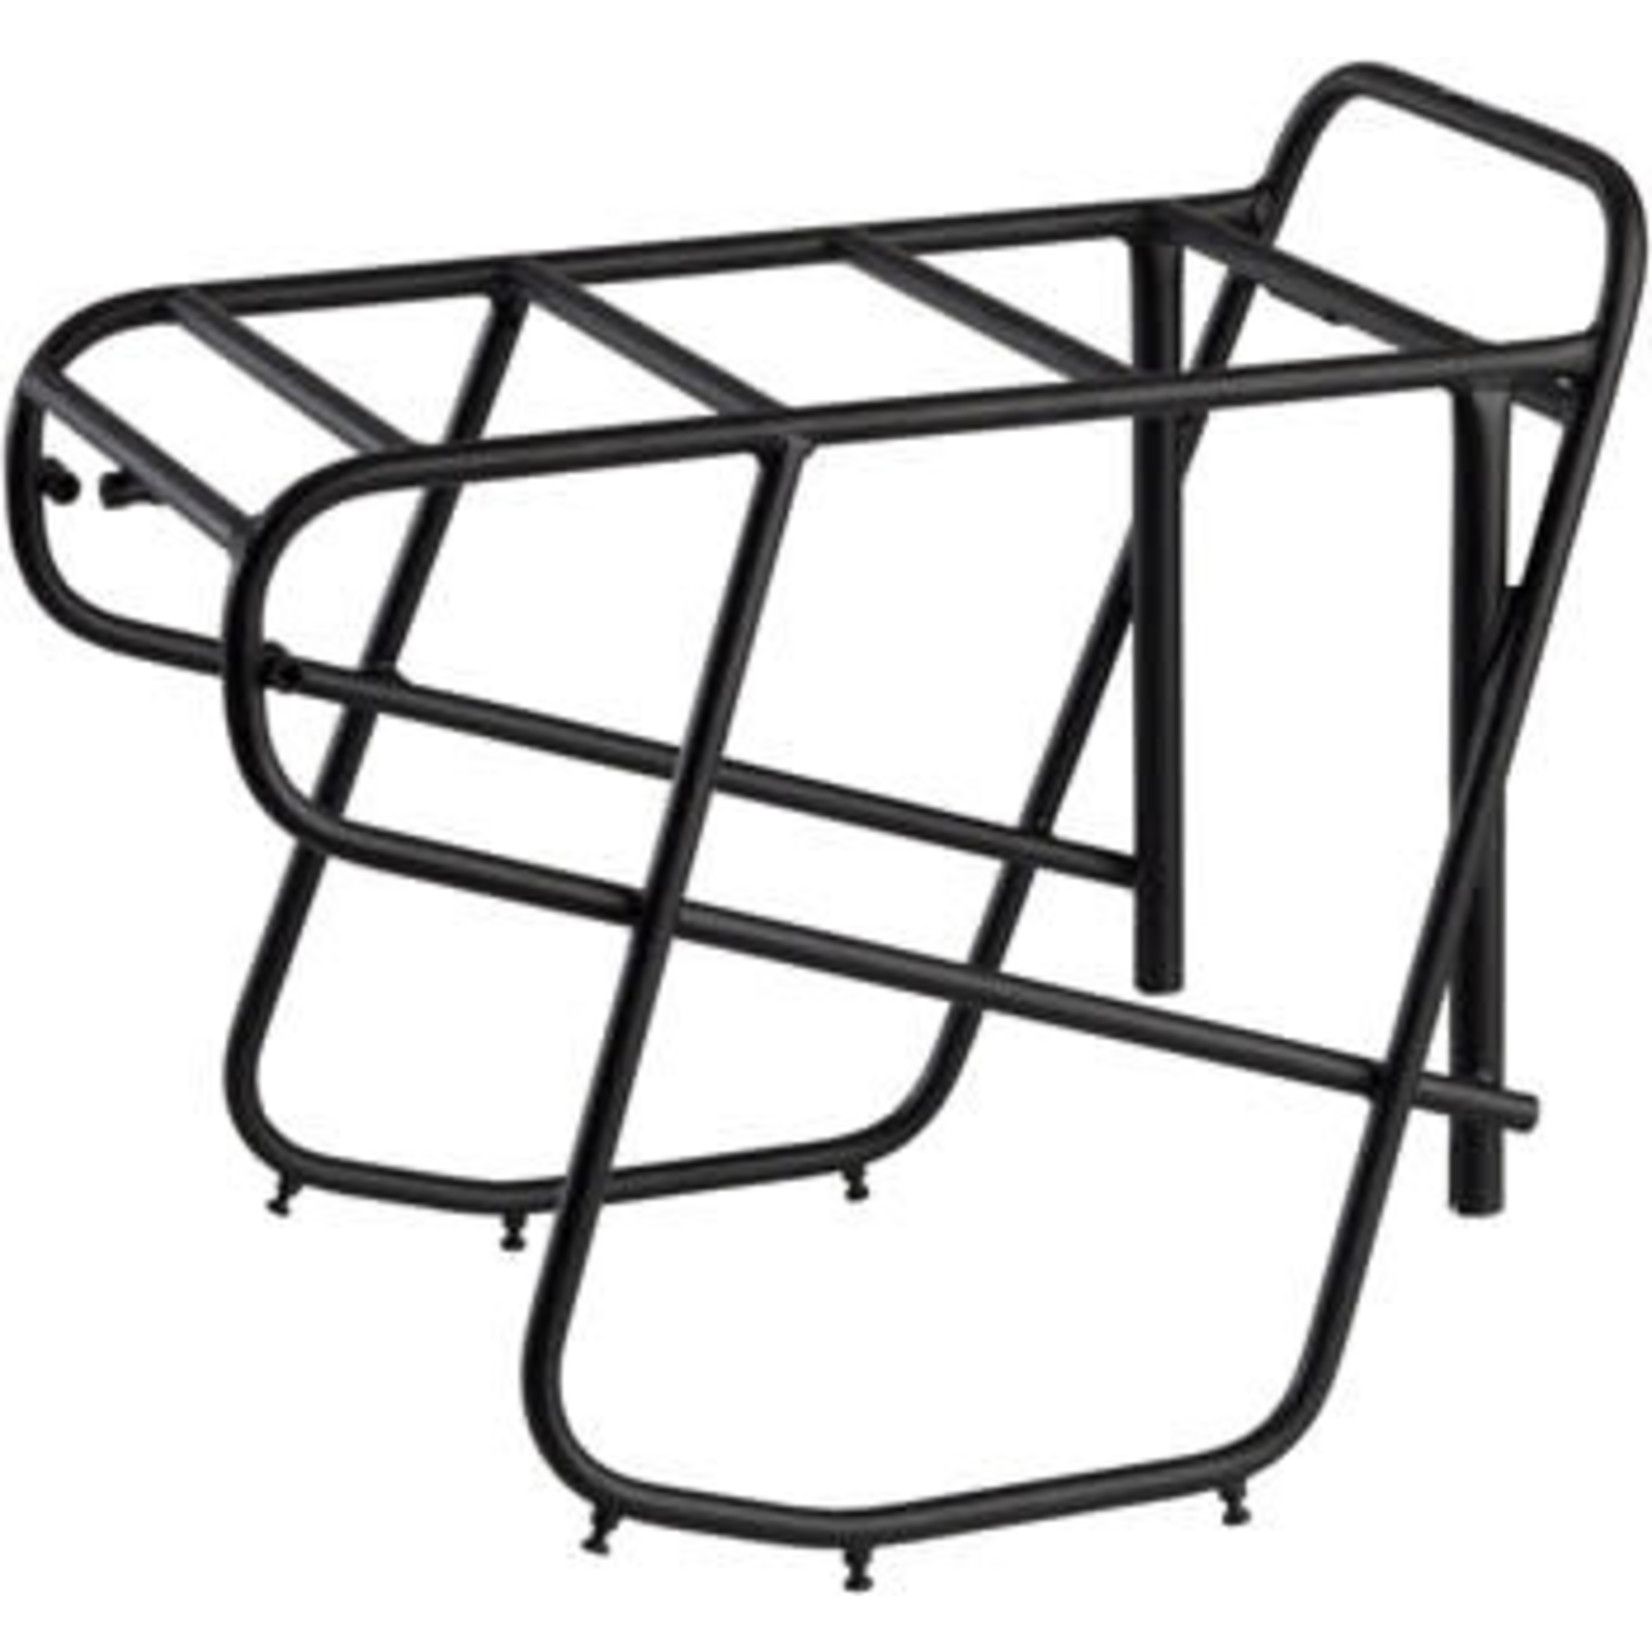 Surly Surly Rear Disc Rack Wide, Black